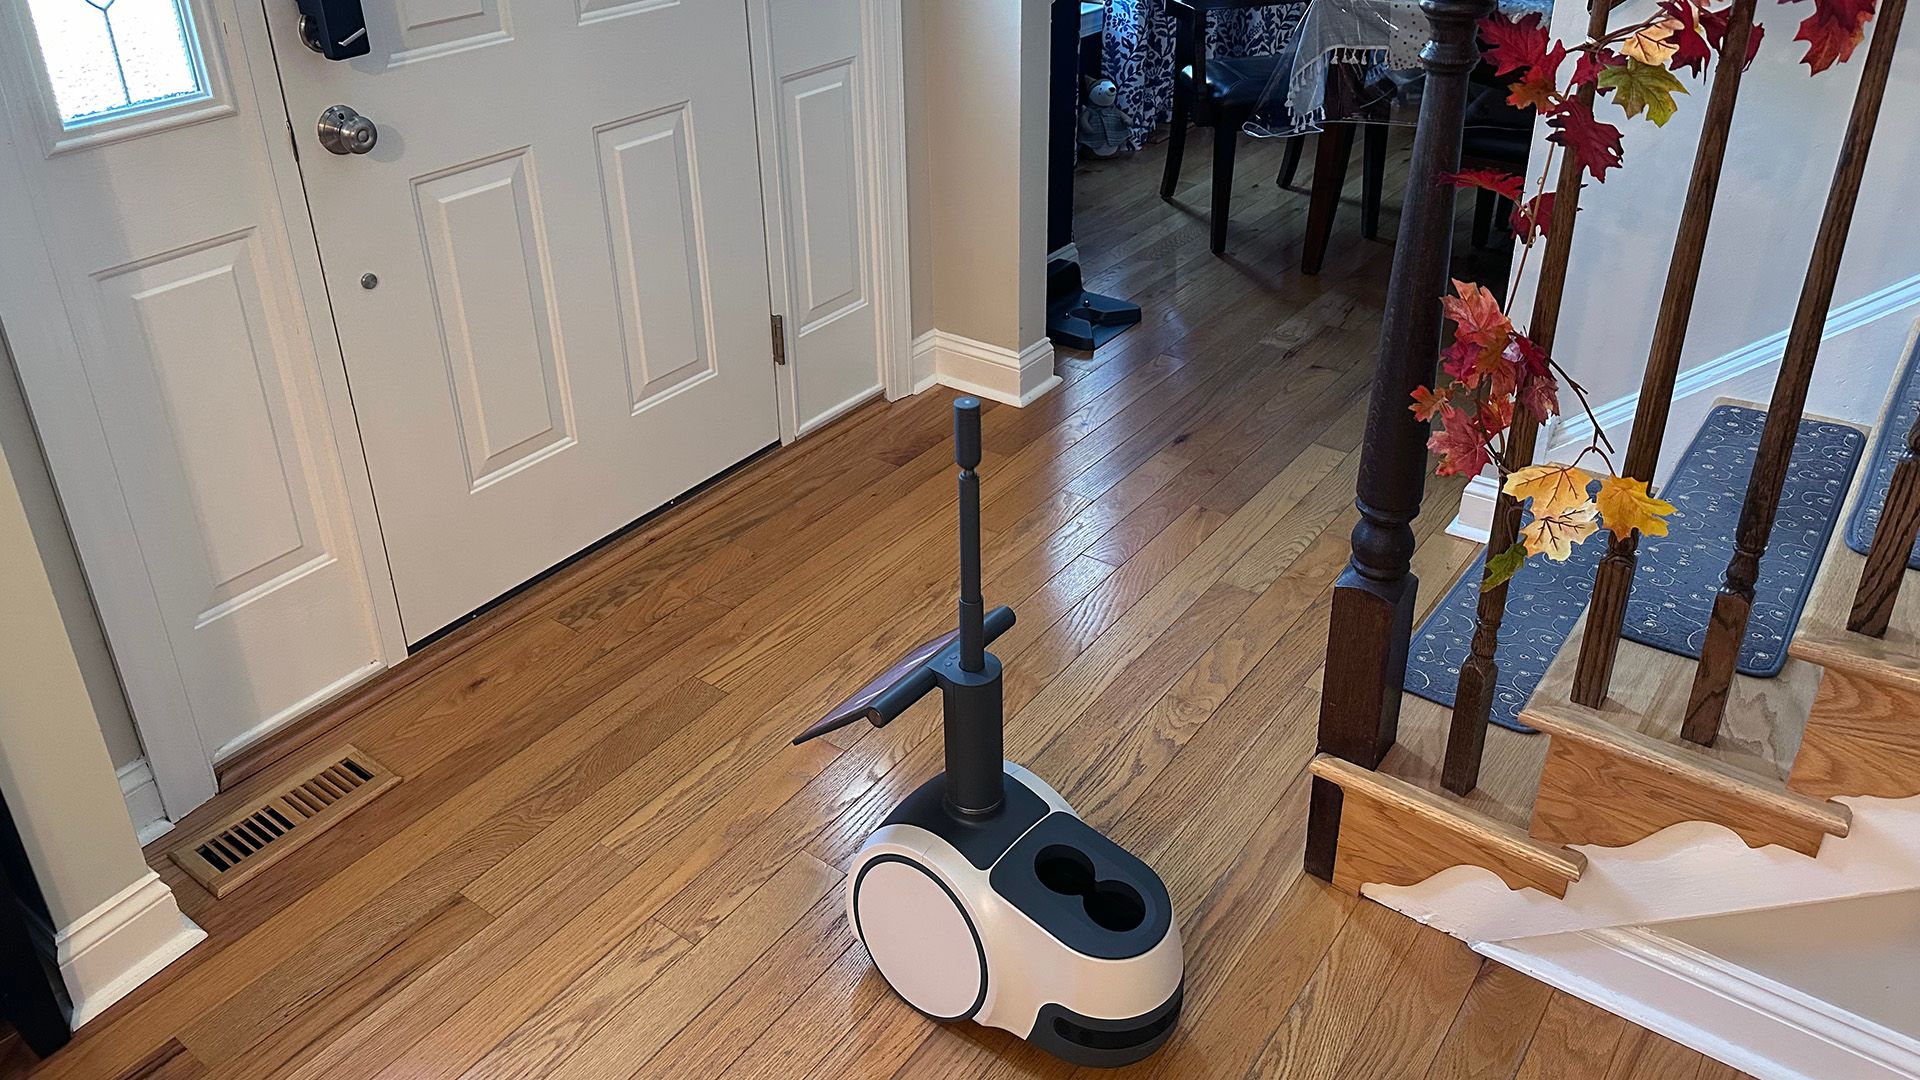 Amazon Astro looking at a front door with its periscope camera